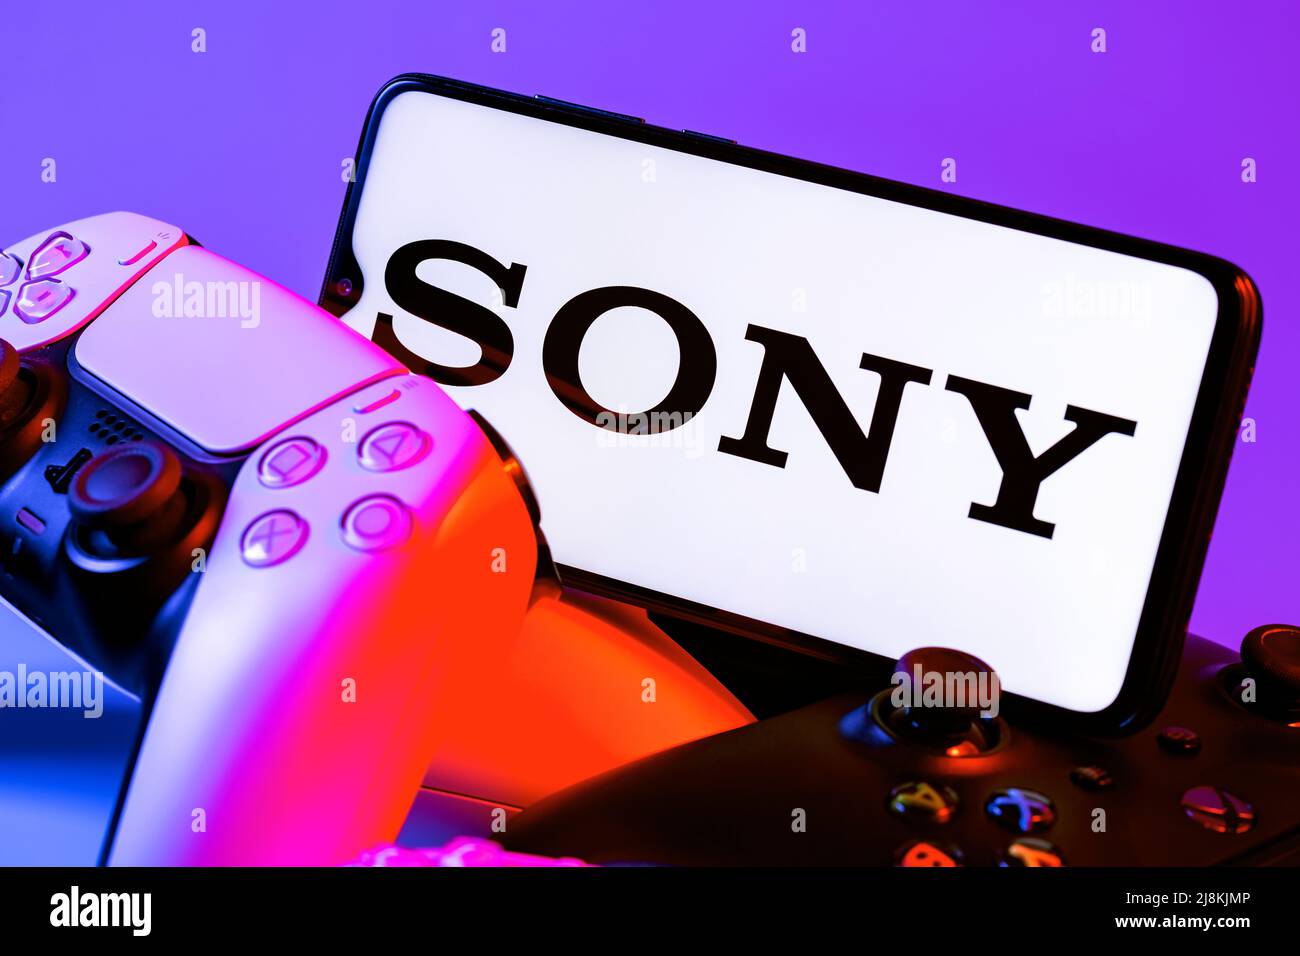 Smartphone with SONY logo on screen on pile of gamepads. Stock Photo